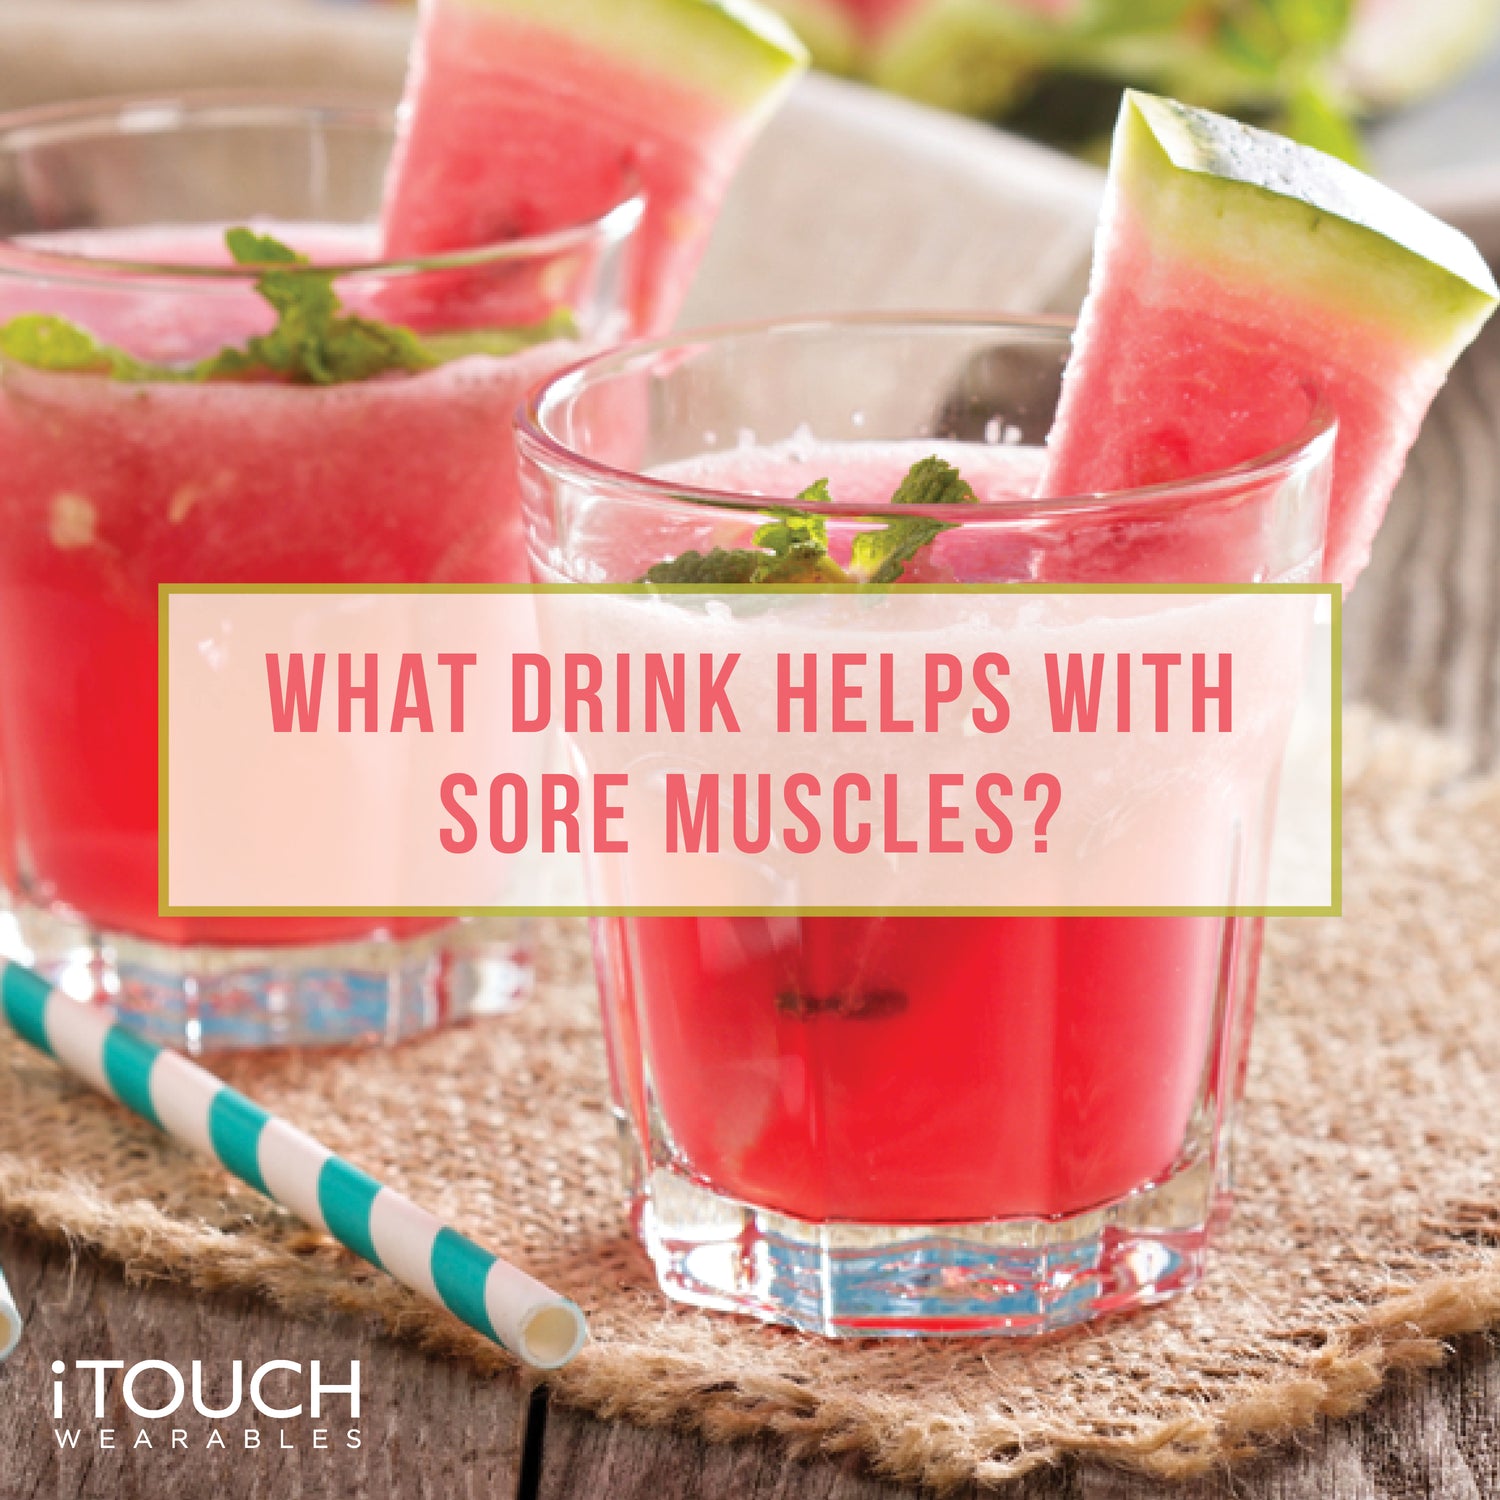 What Drink Helps With Sore Muscles?